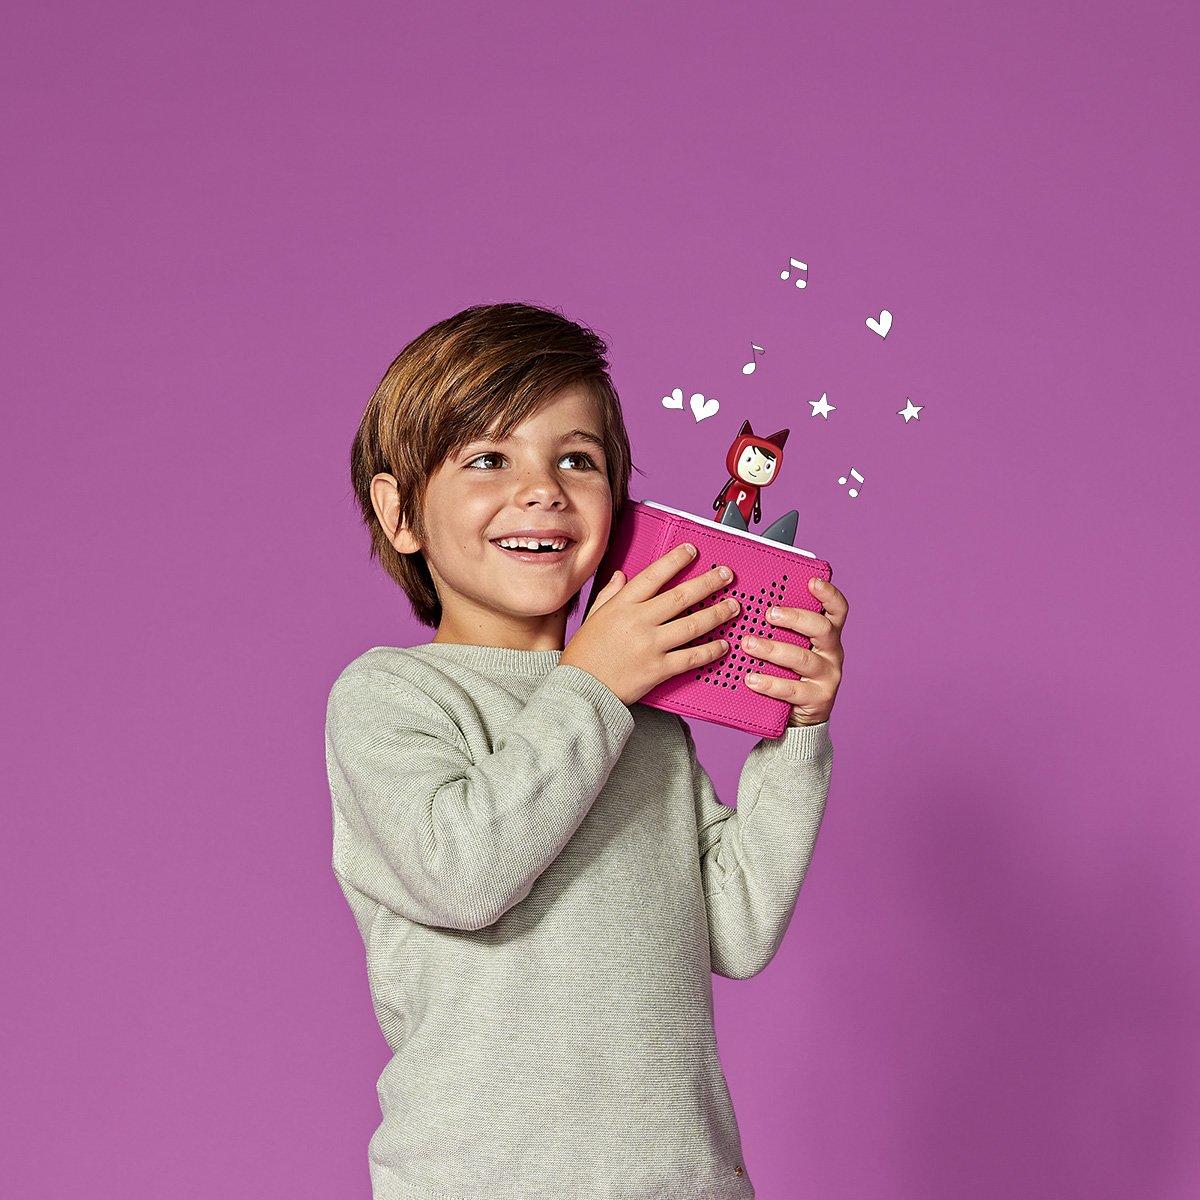 Child holding a purple Toniebox with a purple background.